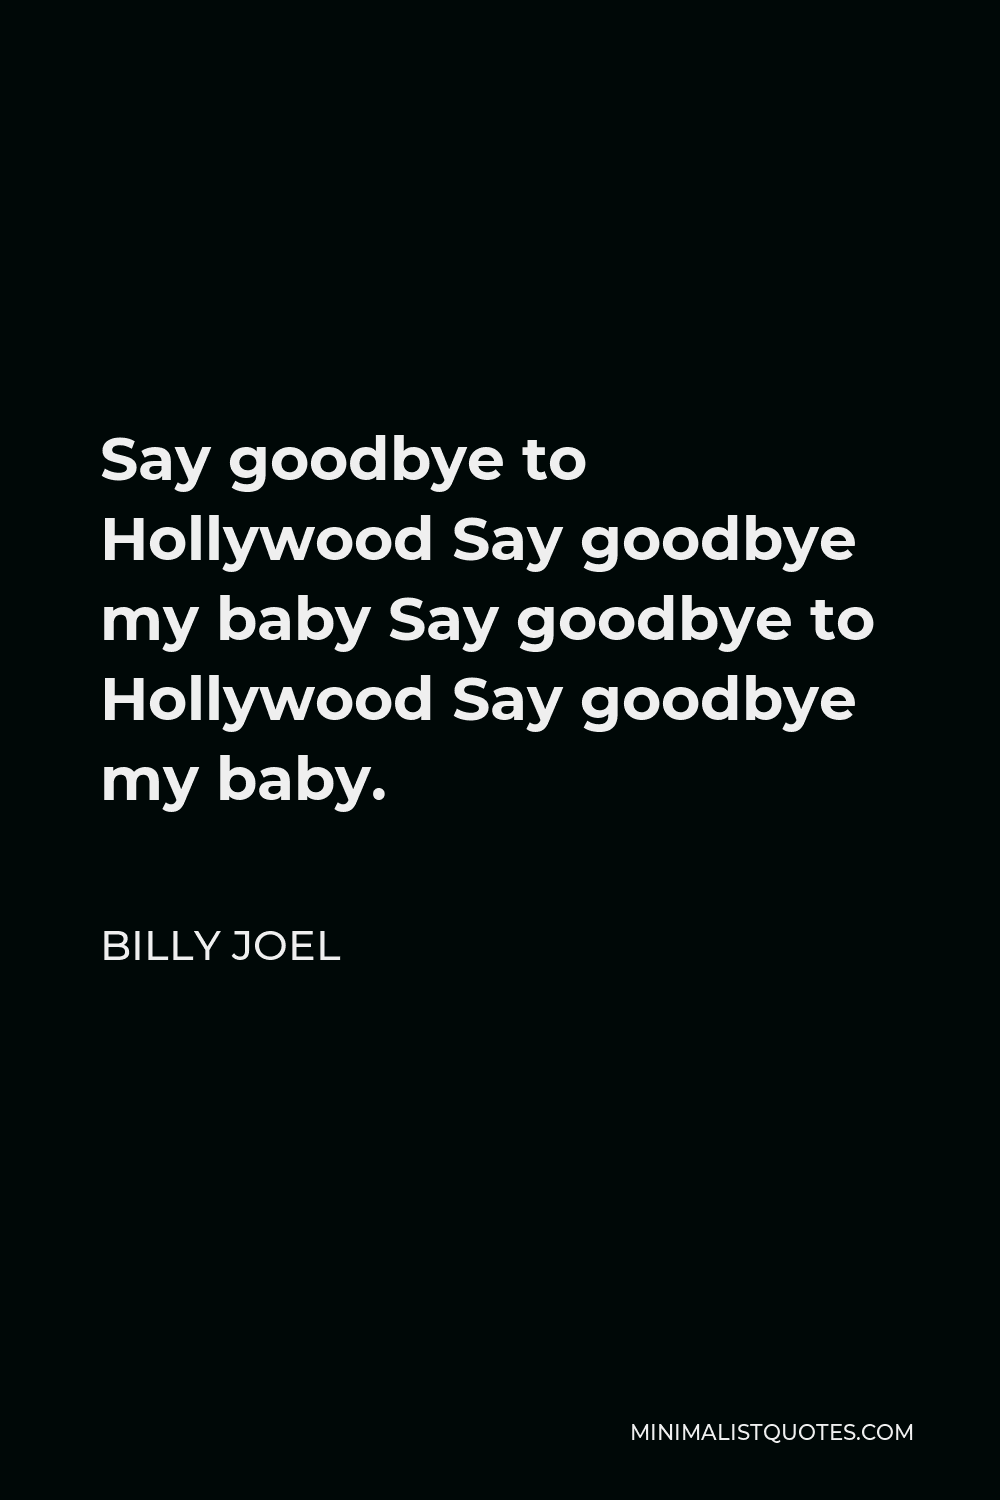 Billy Joel Quote - Say goodbye to Hollywood Say goodbye my baby Say goodbye to Hollywood Say goodbye my baby.